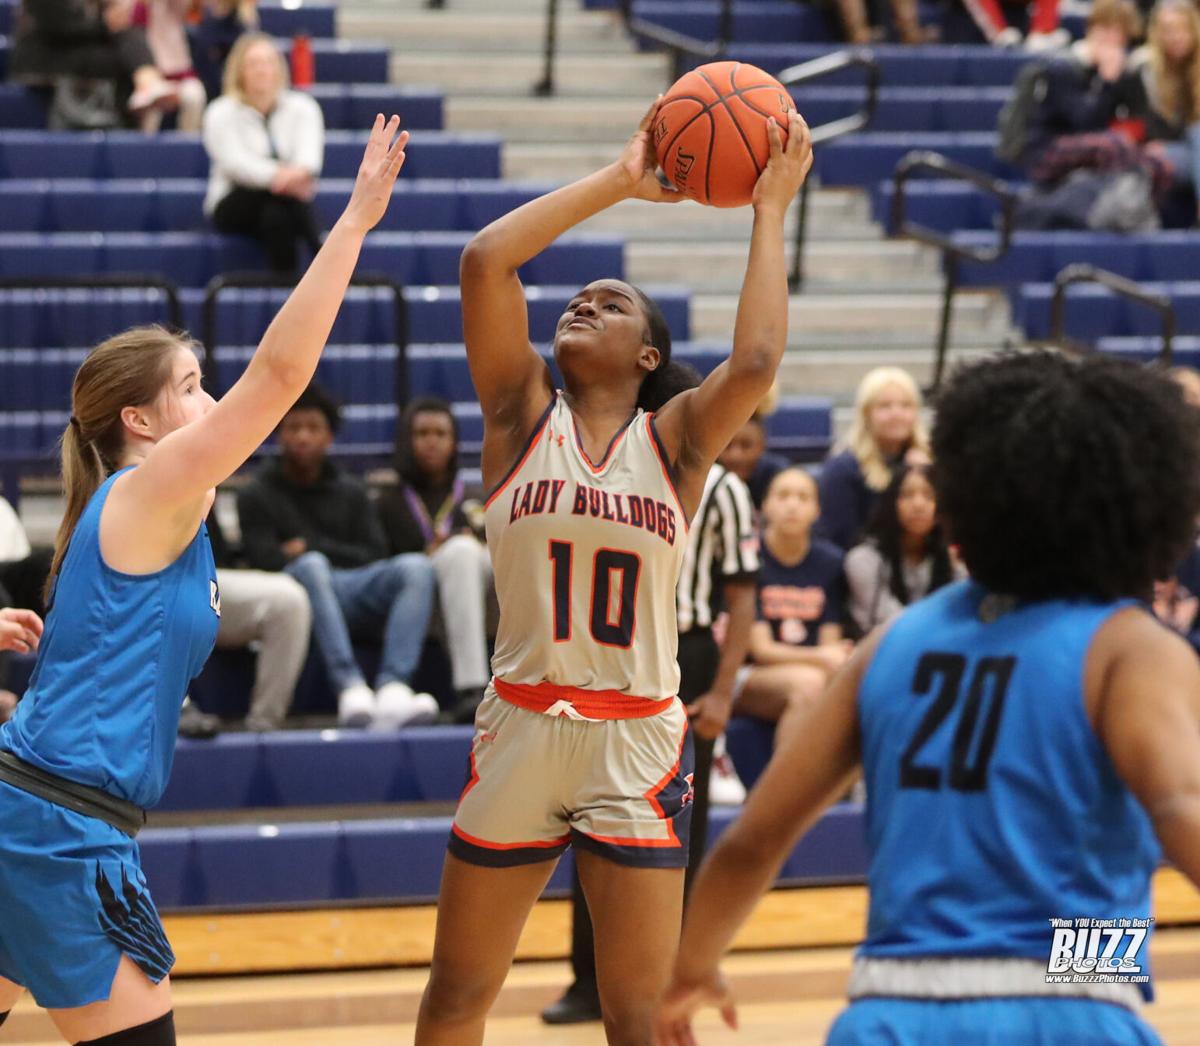 North sweeps Rock Hill: Lady Bulldogs make it 22 in a row; North boys avenge prior loss